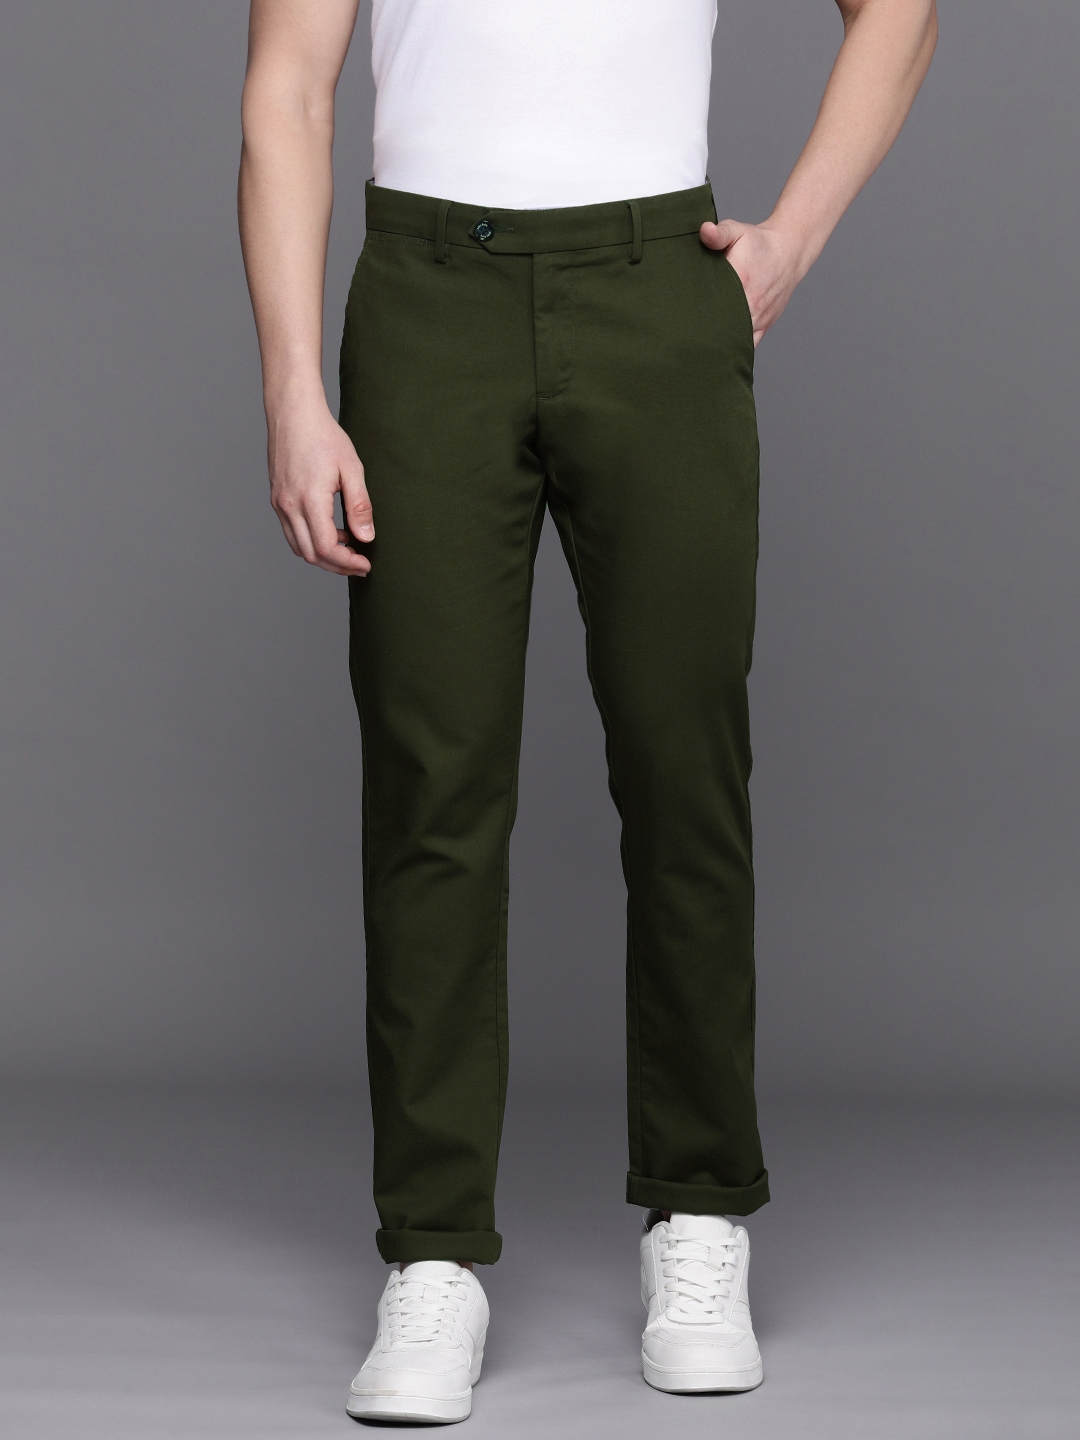 Share more than 156 allen solly trousers latest